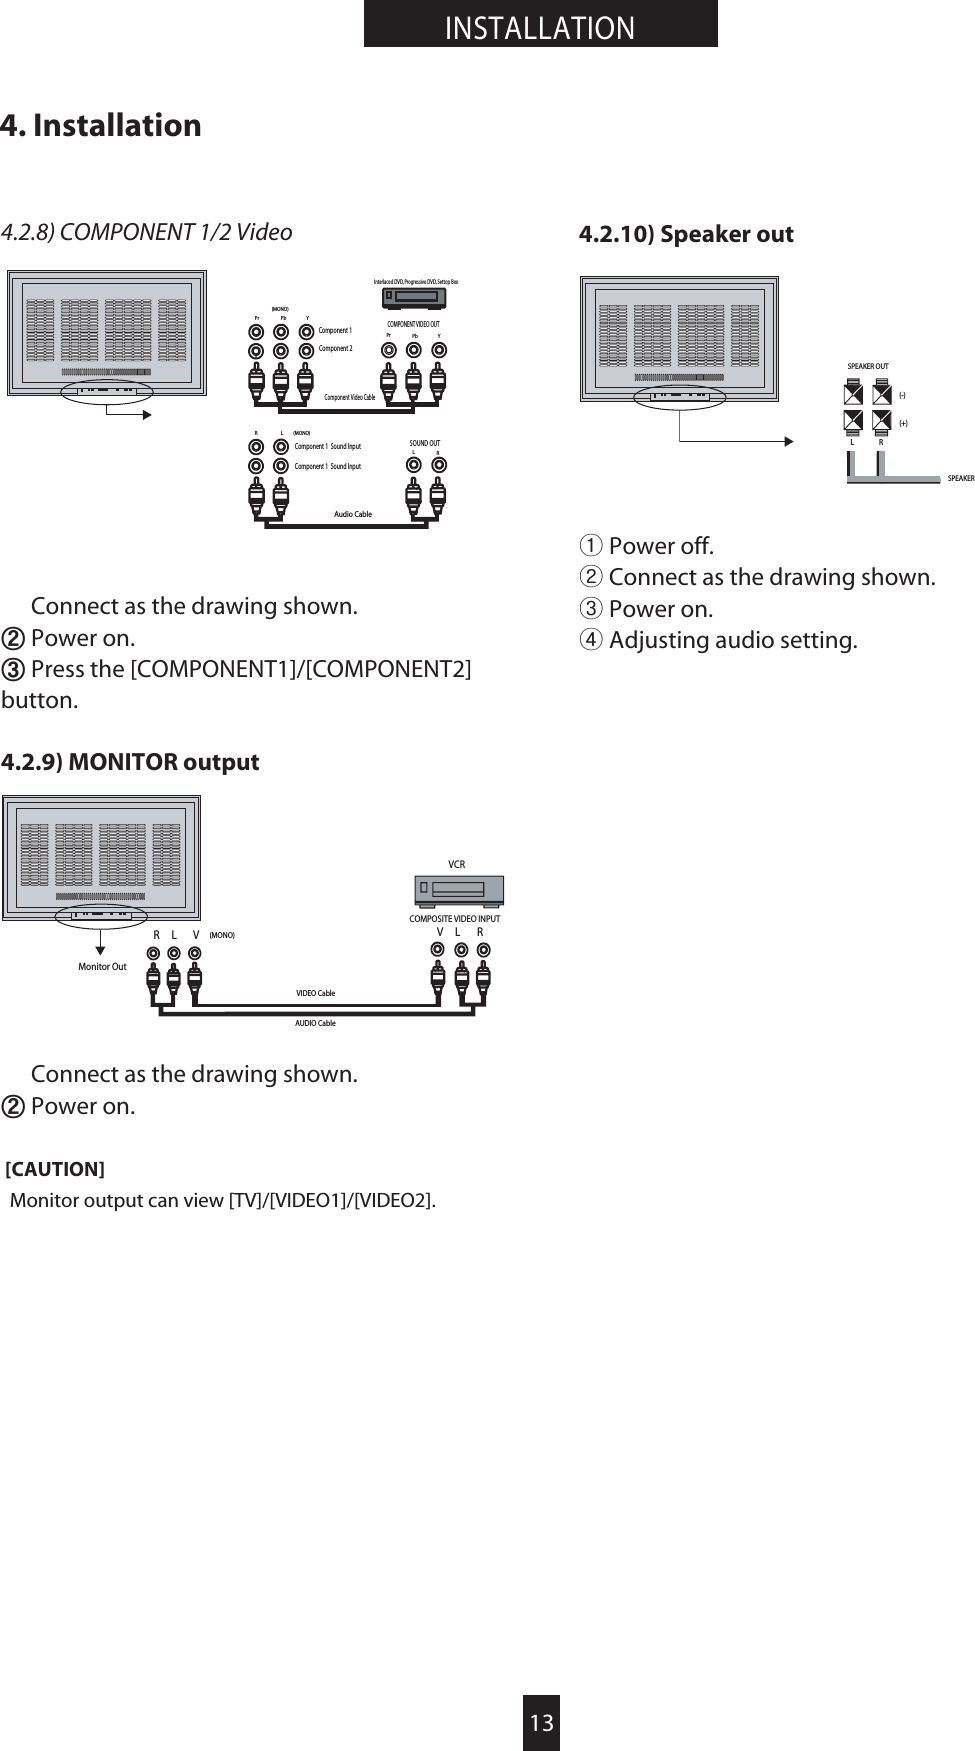 13INSTALLATION4. Installation4.2.8) COMPONENT 1/2 Video̺Connect as the drawing shown.̻Power on.̼Press the [COMPONENT1]/[COMPONENT2]button.4.2.9) MONITOR output̺Connect as the drawing shown.̻Power on.[CAUTION]Monitor output can view [TV]/[VIDEO1]/[VIDEO2].4.2.10) Speaker outྙPower off.ྚConnect as the drawing shown.ྛPower on.ྜAdjusting audio setting.GVIDEO CableCOMPOSITE VIDEO INPUTVCRPr Pb YComponent Video Cable(MONO)COMPONENT VIDEO OUTInterlaced DVD, Progressive DVD, Settop BoxComponent 1Component 2RLRLAudio Cable(MONO)SOUND OUTComponent 1 Sound InputComponent 1 Sound InputPr Pb YSPEAKER OUT(-)(+)LRSPEAKERMonitor OutRL V(MONO)AUDIO CableVL R